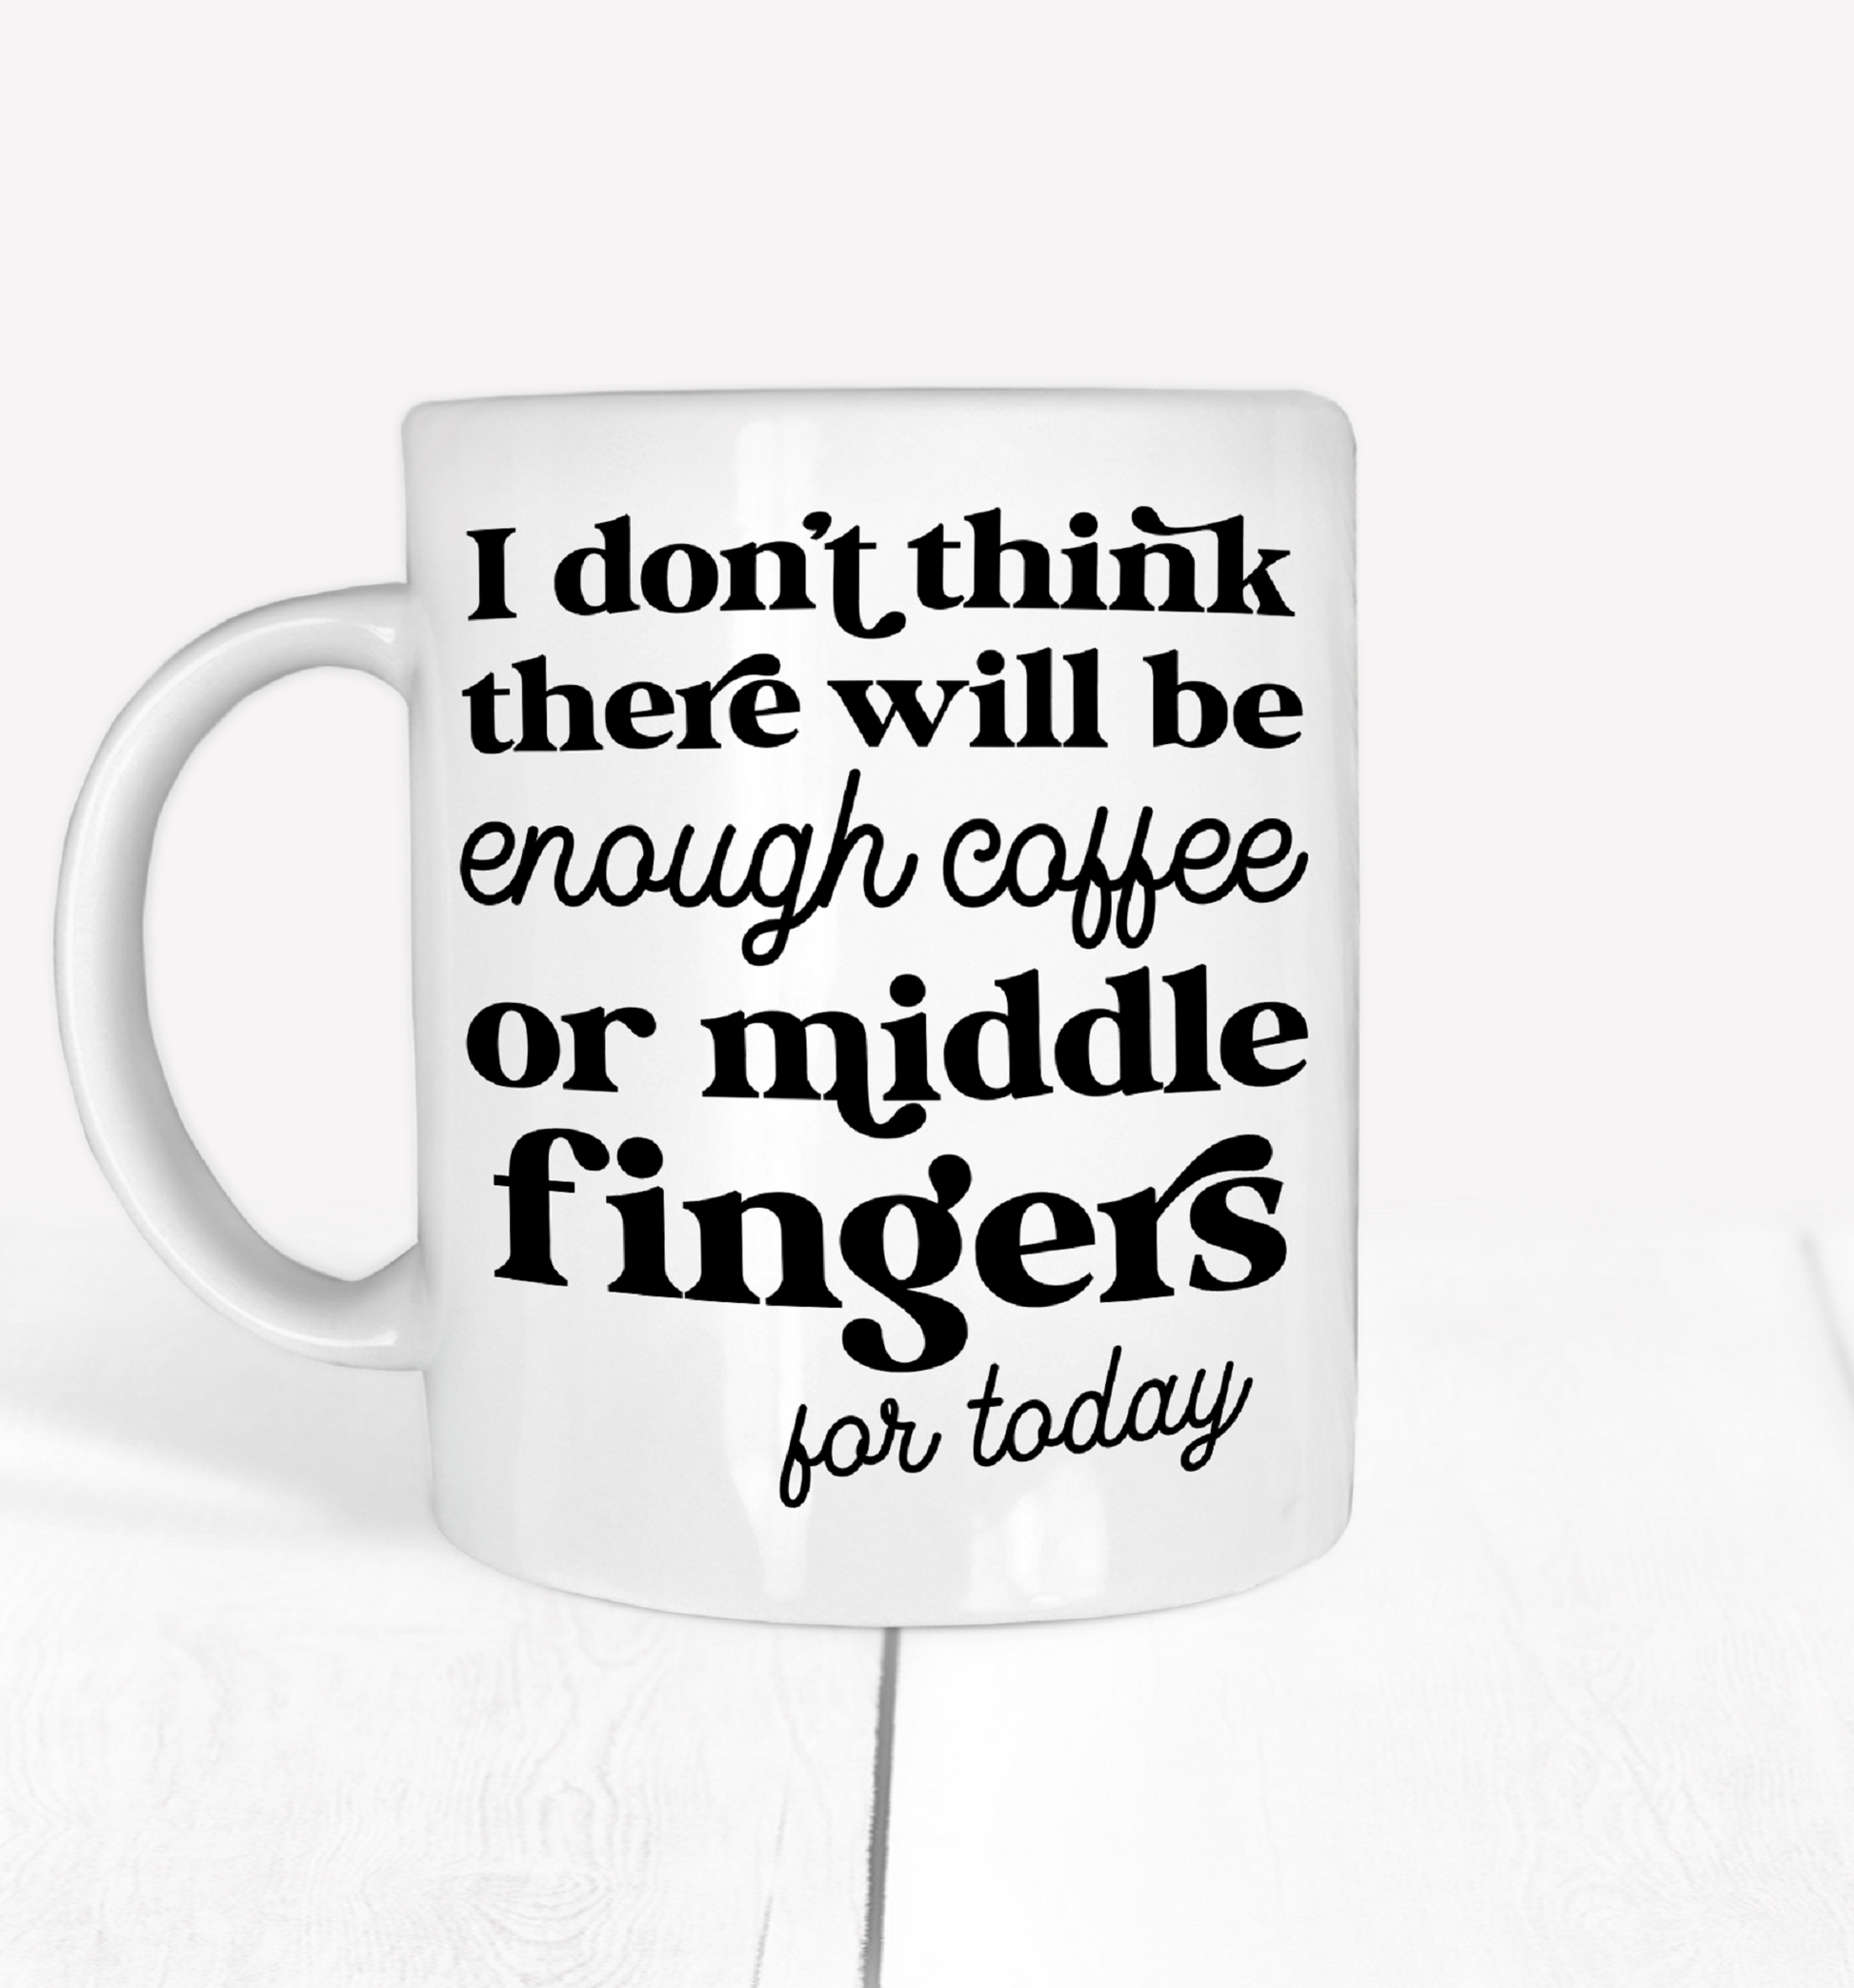  Funny Coffee and Middle Finger Mug by Free Spirit Accessories sold by Free Spirit Accessories